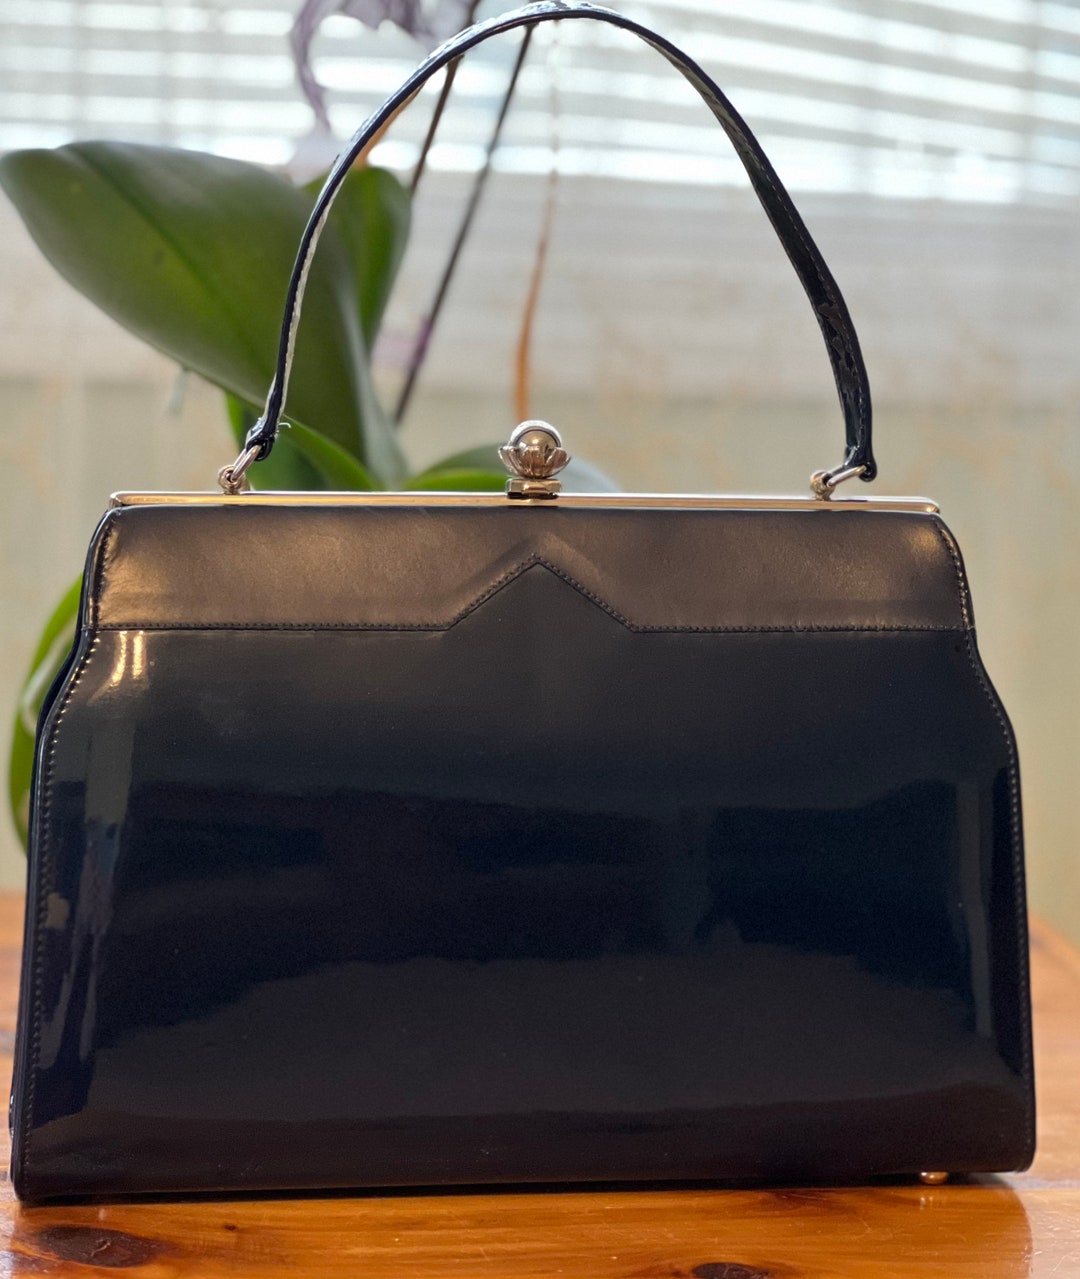 Vintage 60's Black Patent Leather and Suede Handbag by Naturalizer